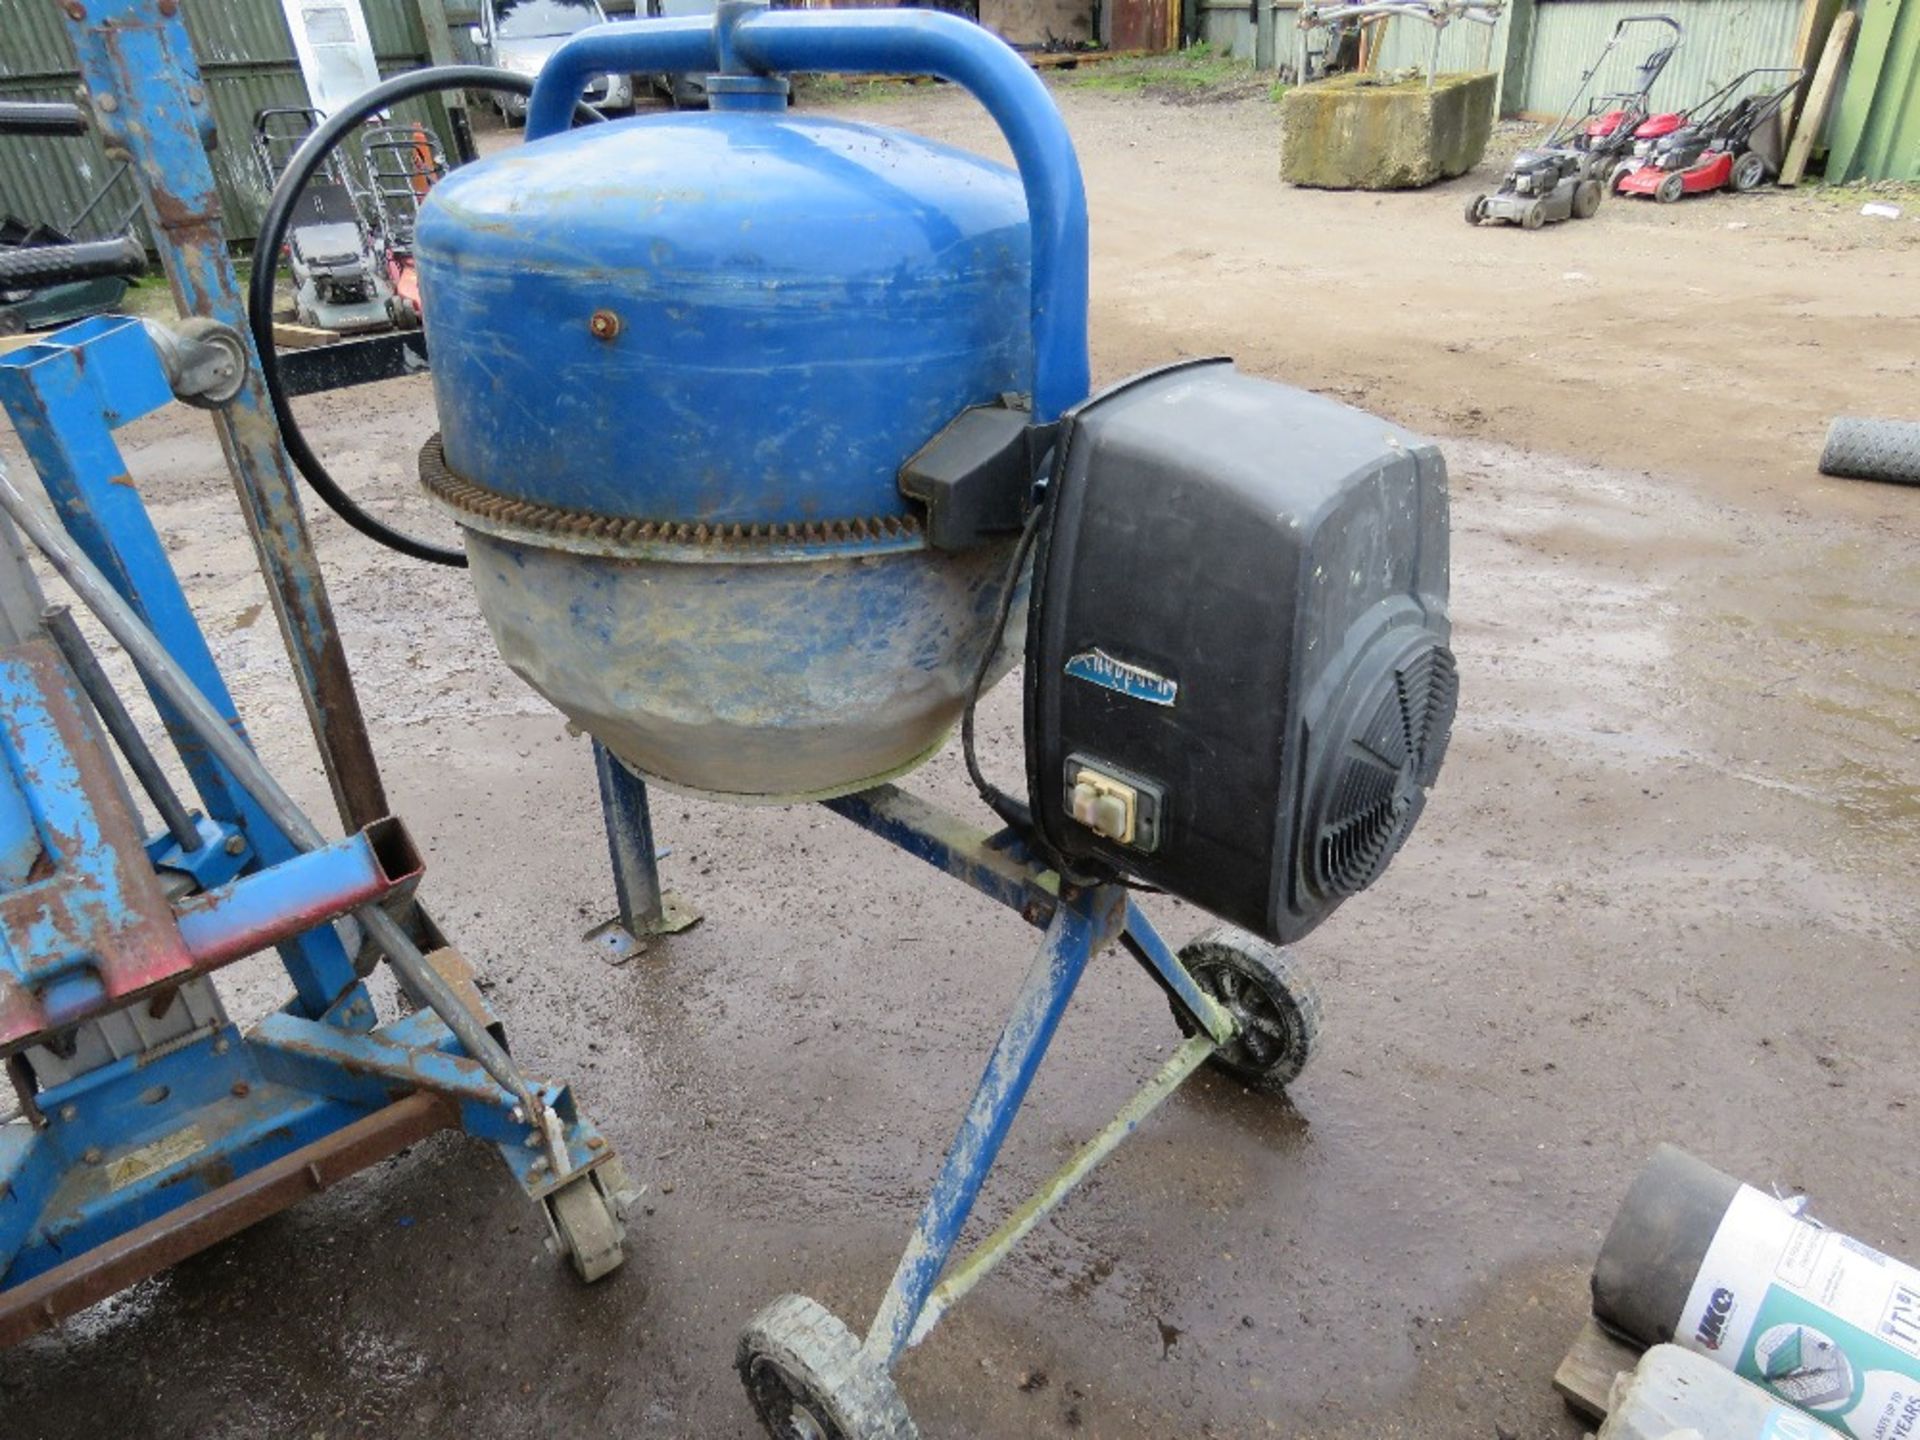 STEPPACH 180 CEMENT MIXER, 240VOLT POWERED. DIRECT FROM LOCAL RETIRING BUILDER. THIS LOT IS SOLD - Image 3 of 4